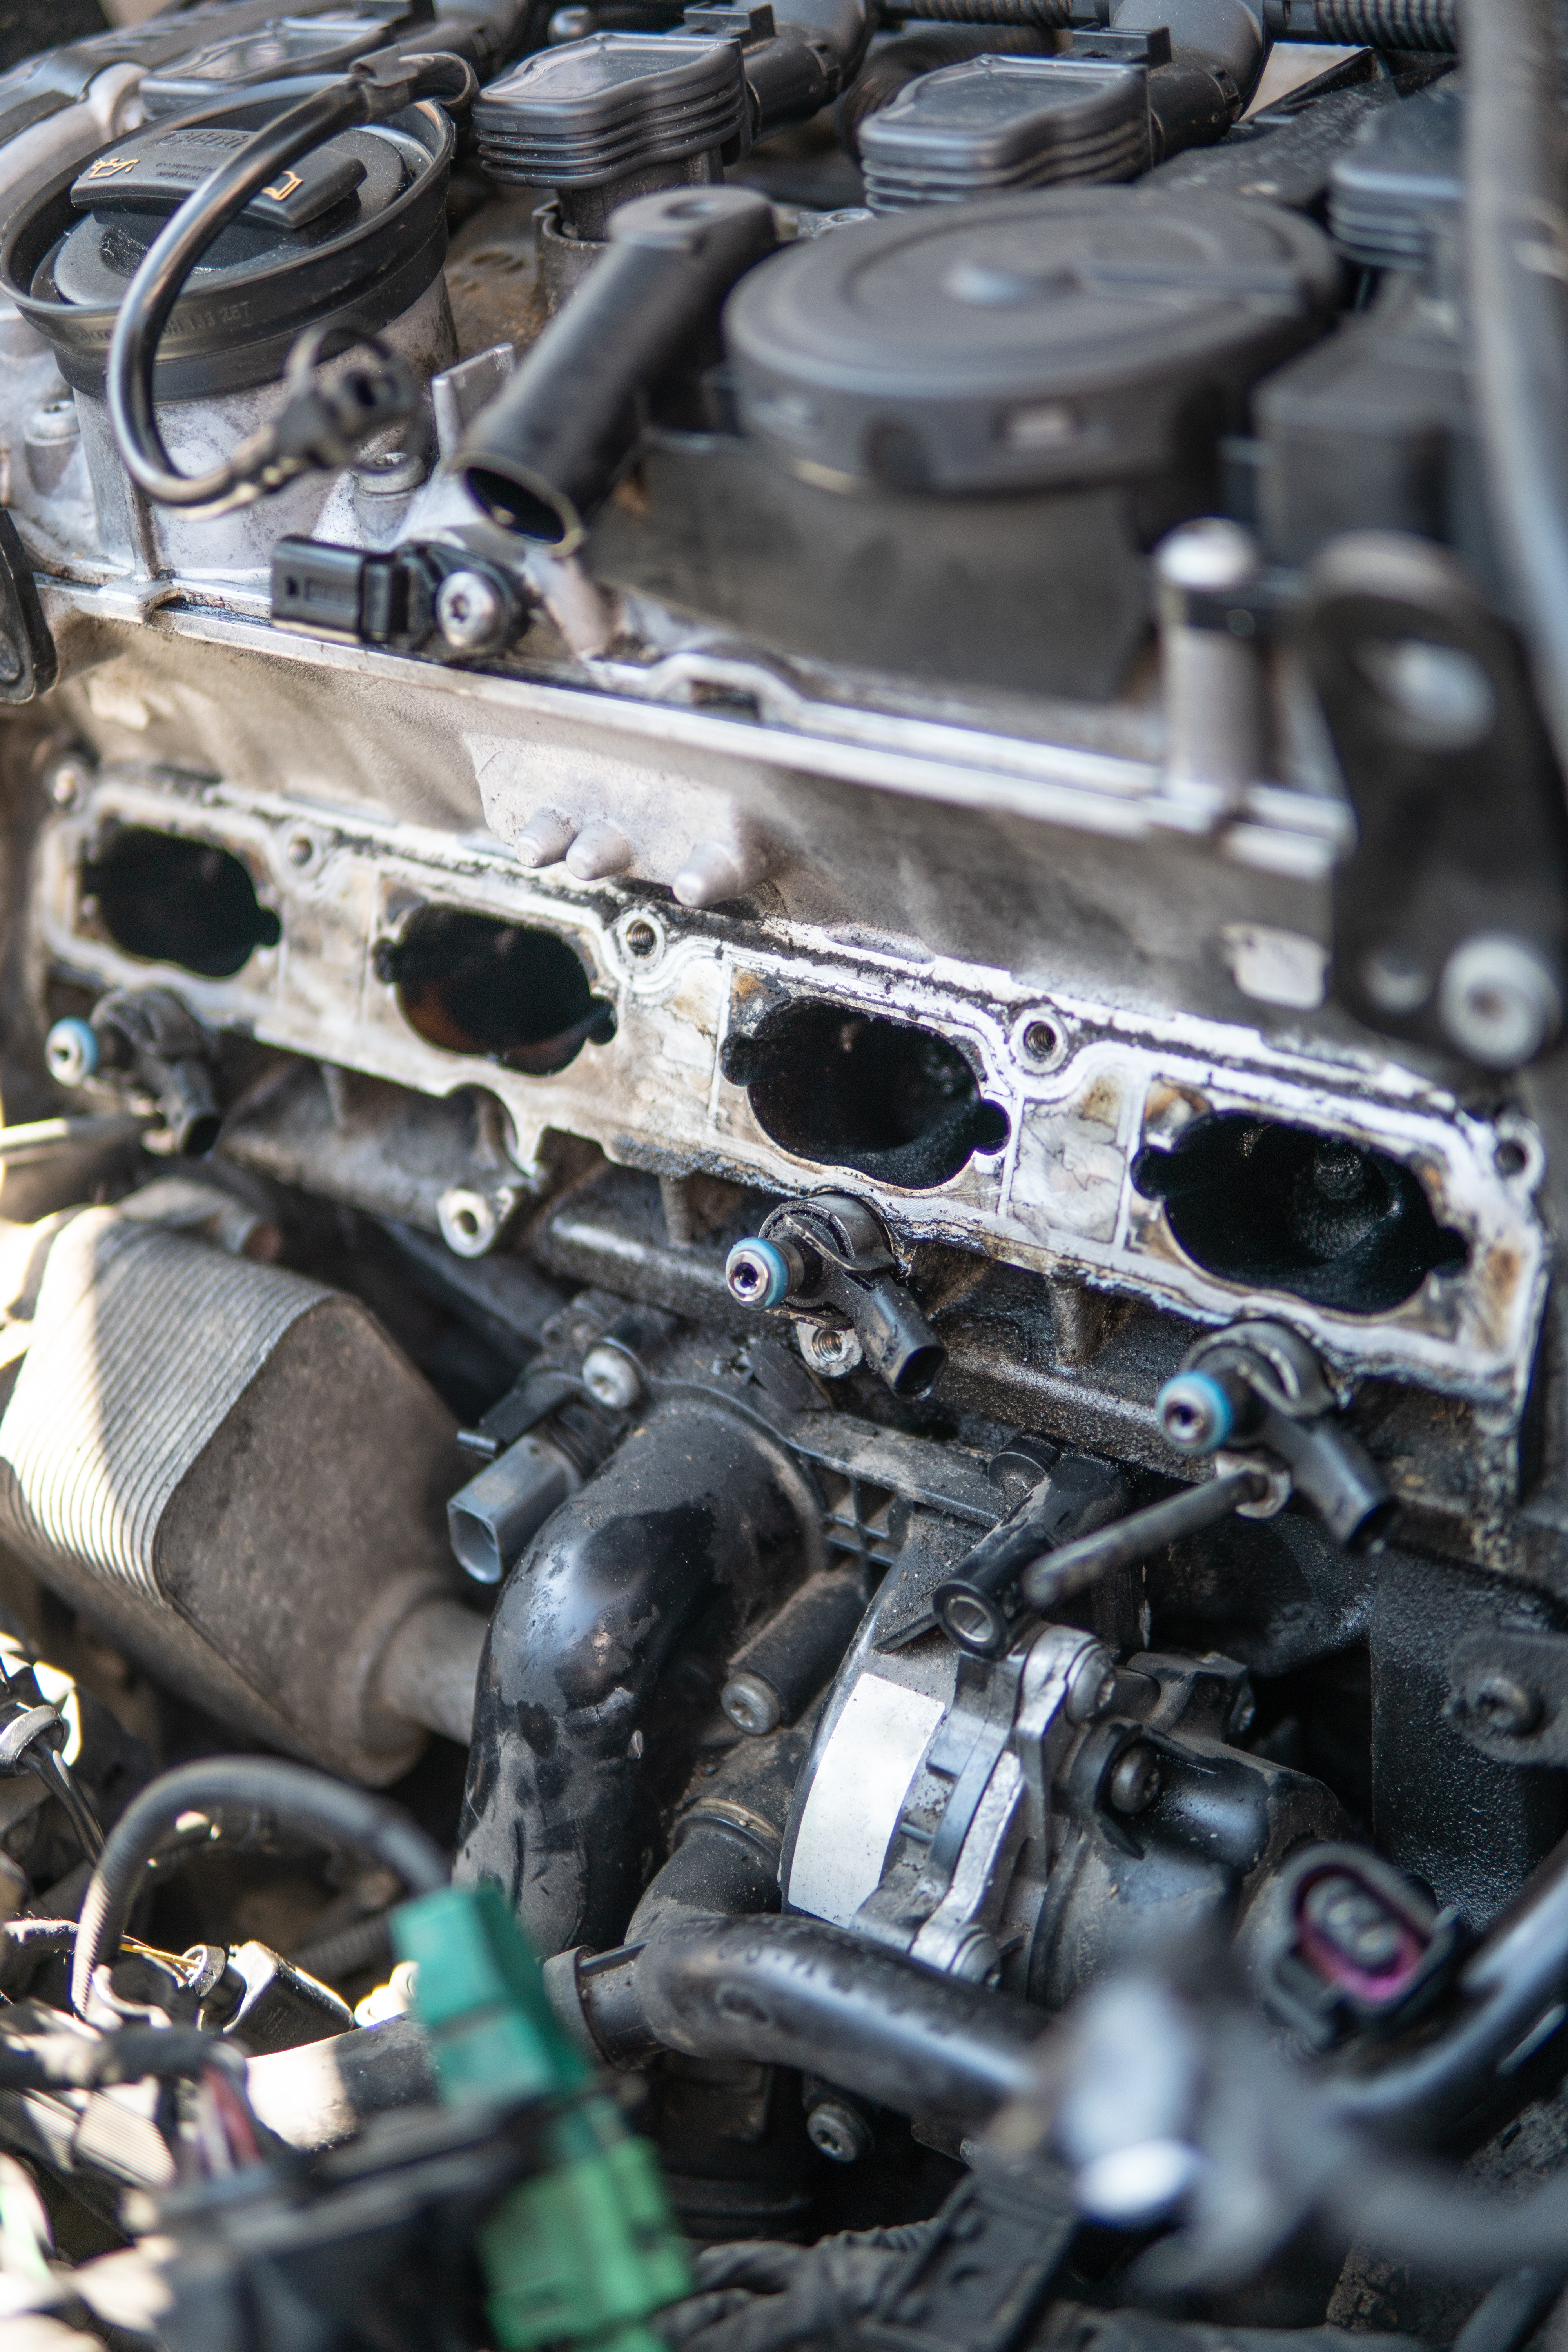 An image of a dirty intake manifold but DPF Alternatives can help with our expert intake manifold cleaning service in Spokane-Coeur d'Alene, WA/ID.